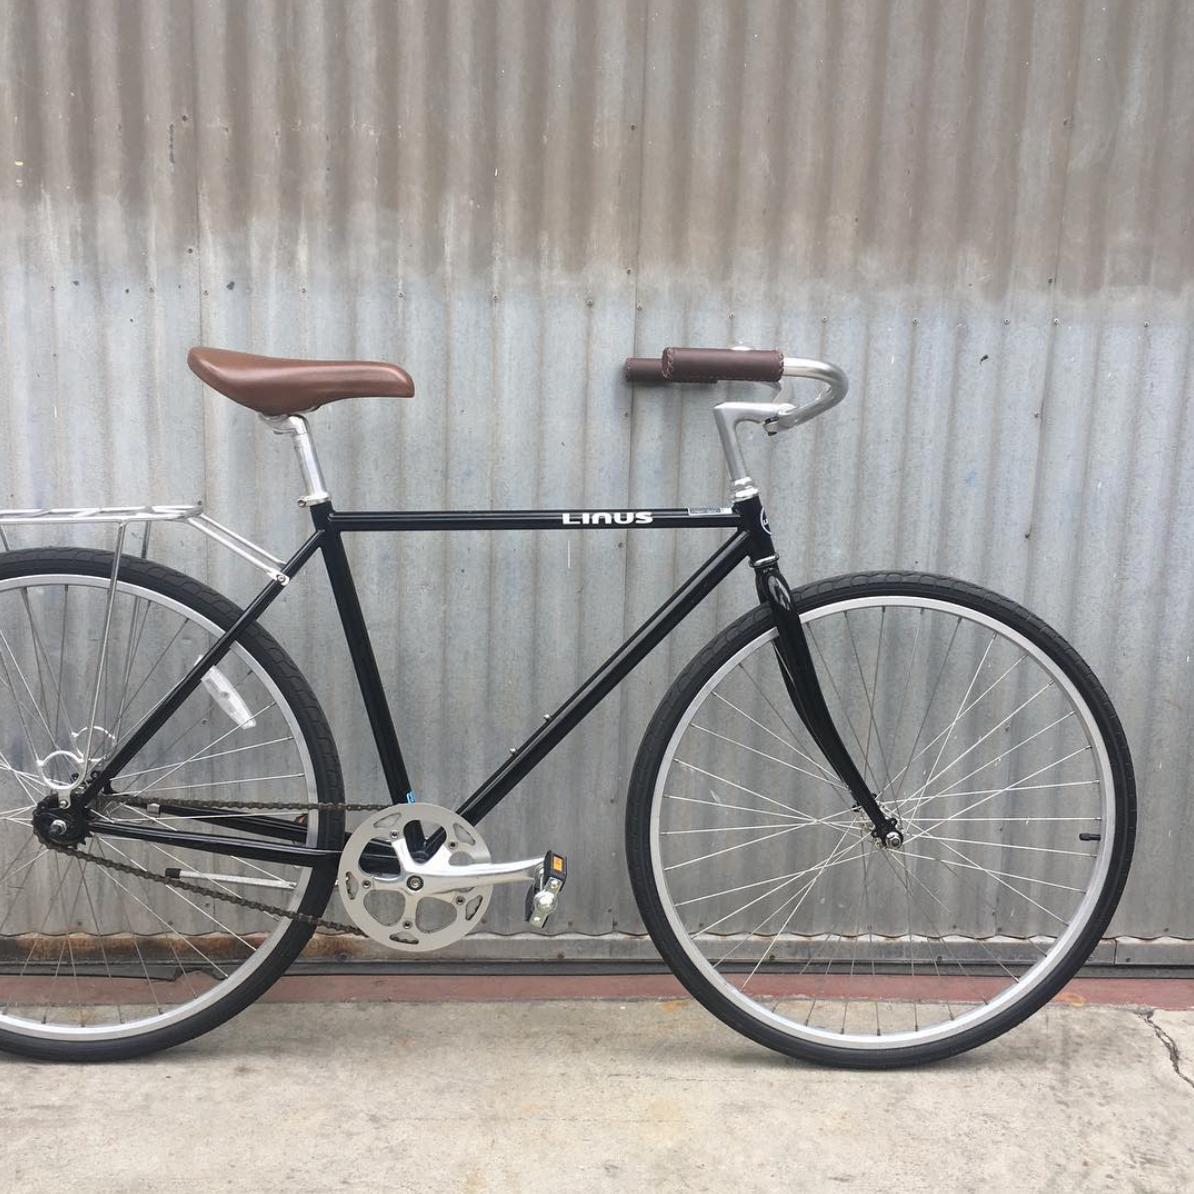 Linus Single Speed in Excellent Used Condition